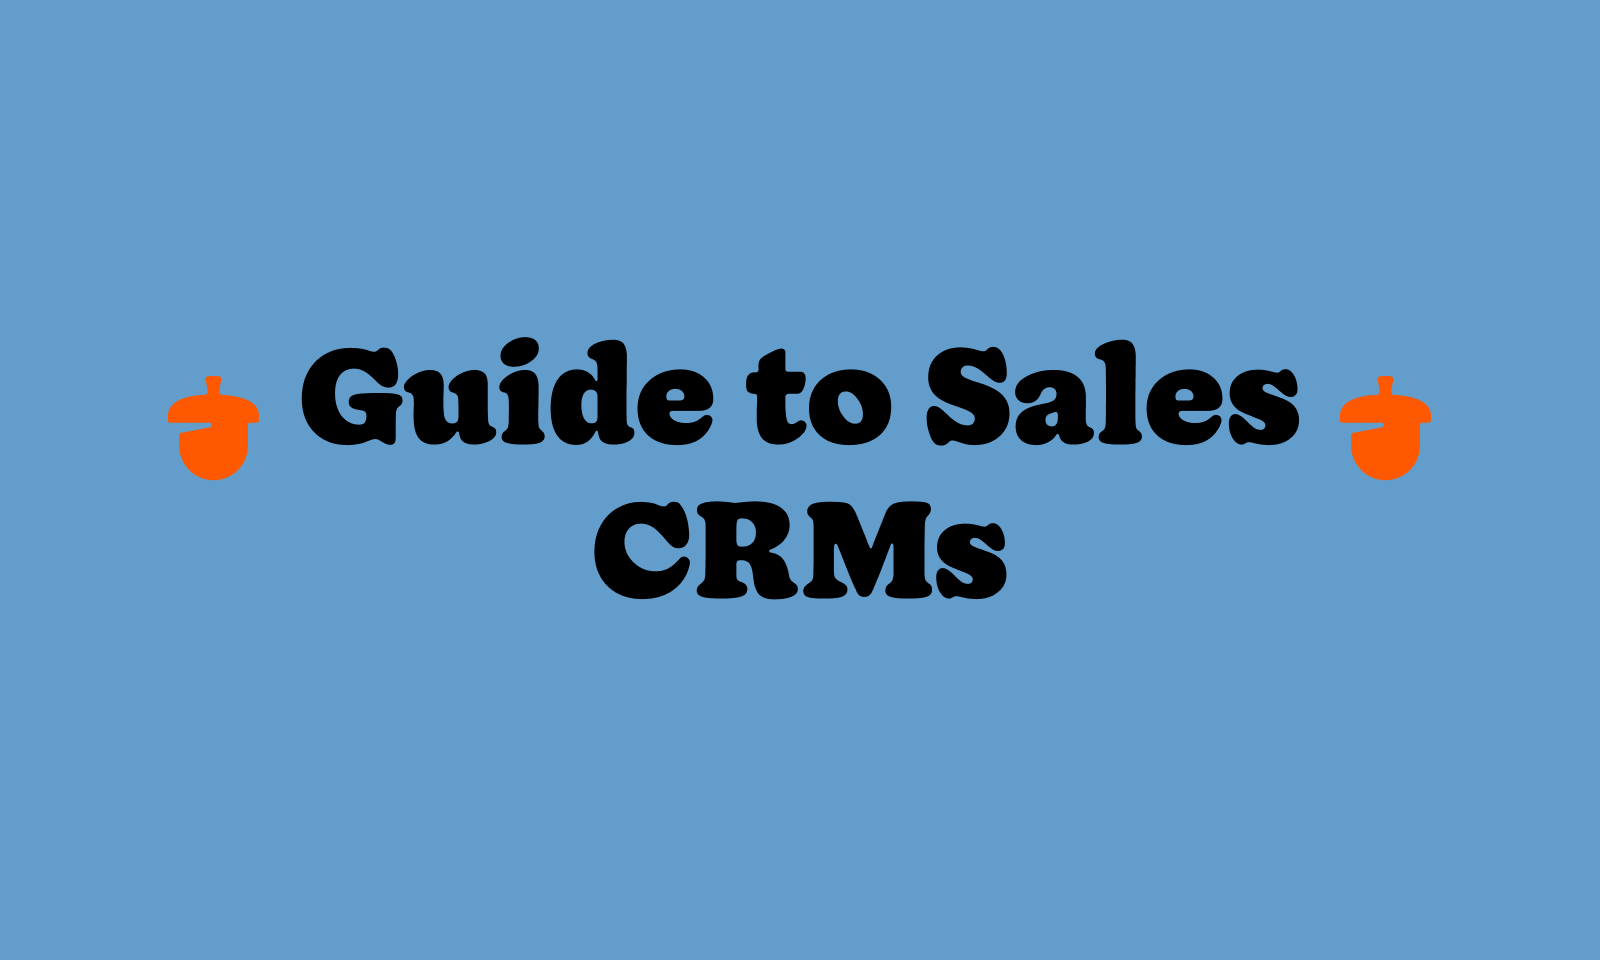 Guide to Sales CRMs